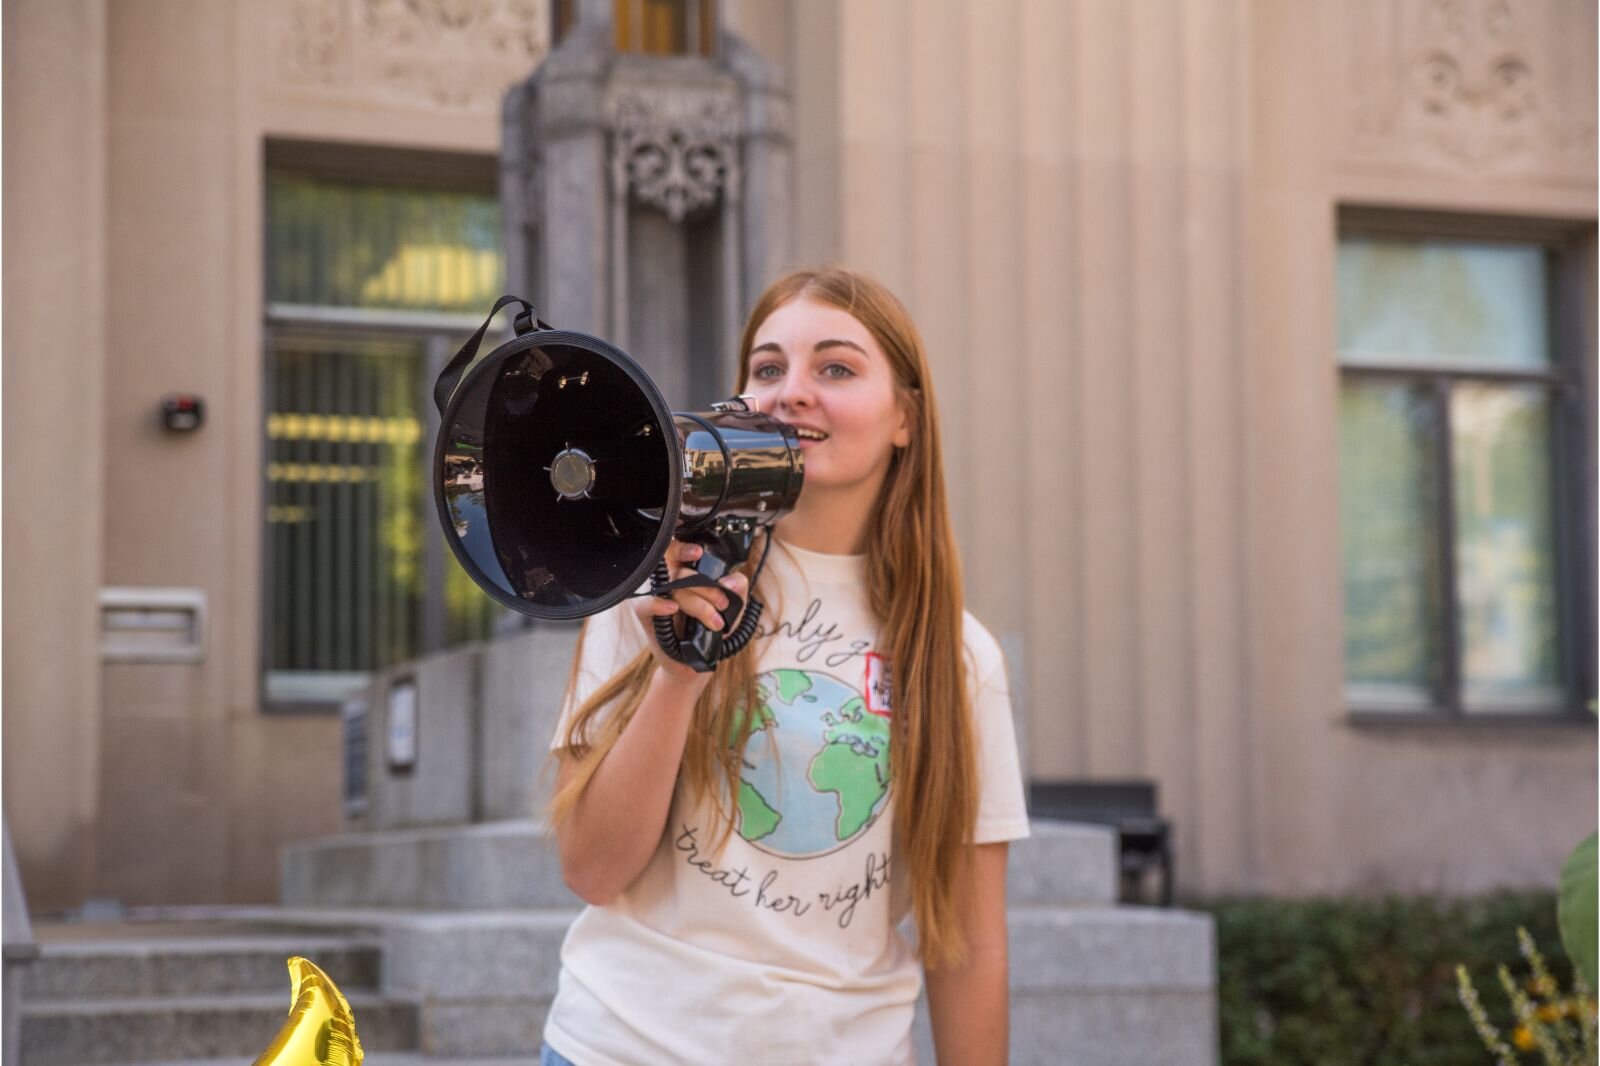 Mia Breznau, one of the Youth Climate Strike organizers, with megaphone addresses the marchers.